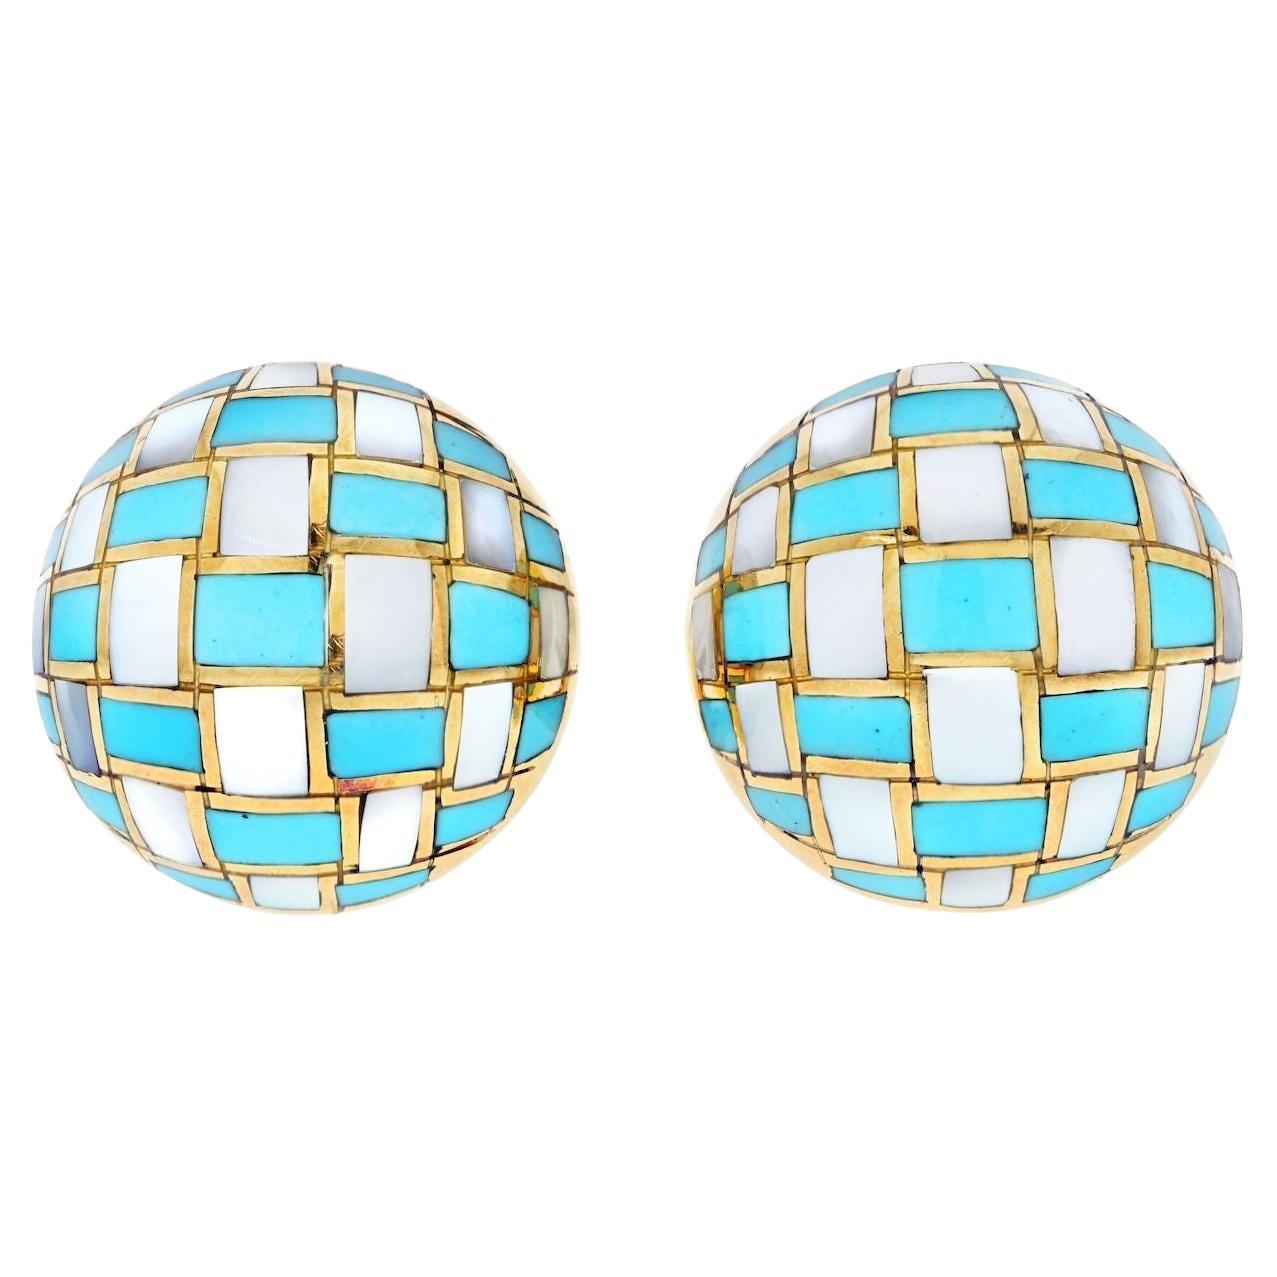 Tiffany & Co. Angela Cummings Checkerboard Mother of Pearl and Turquoise Earring